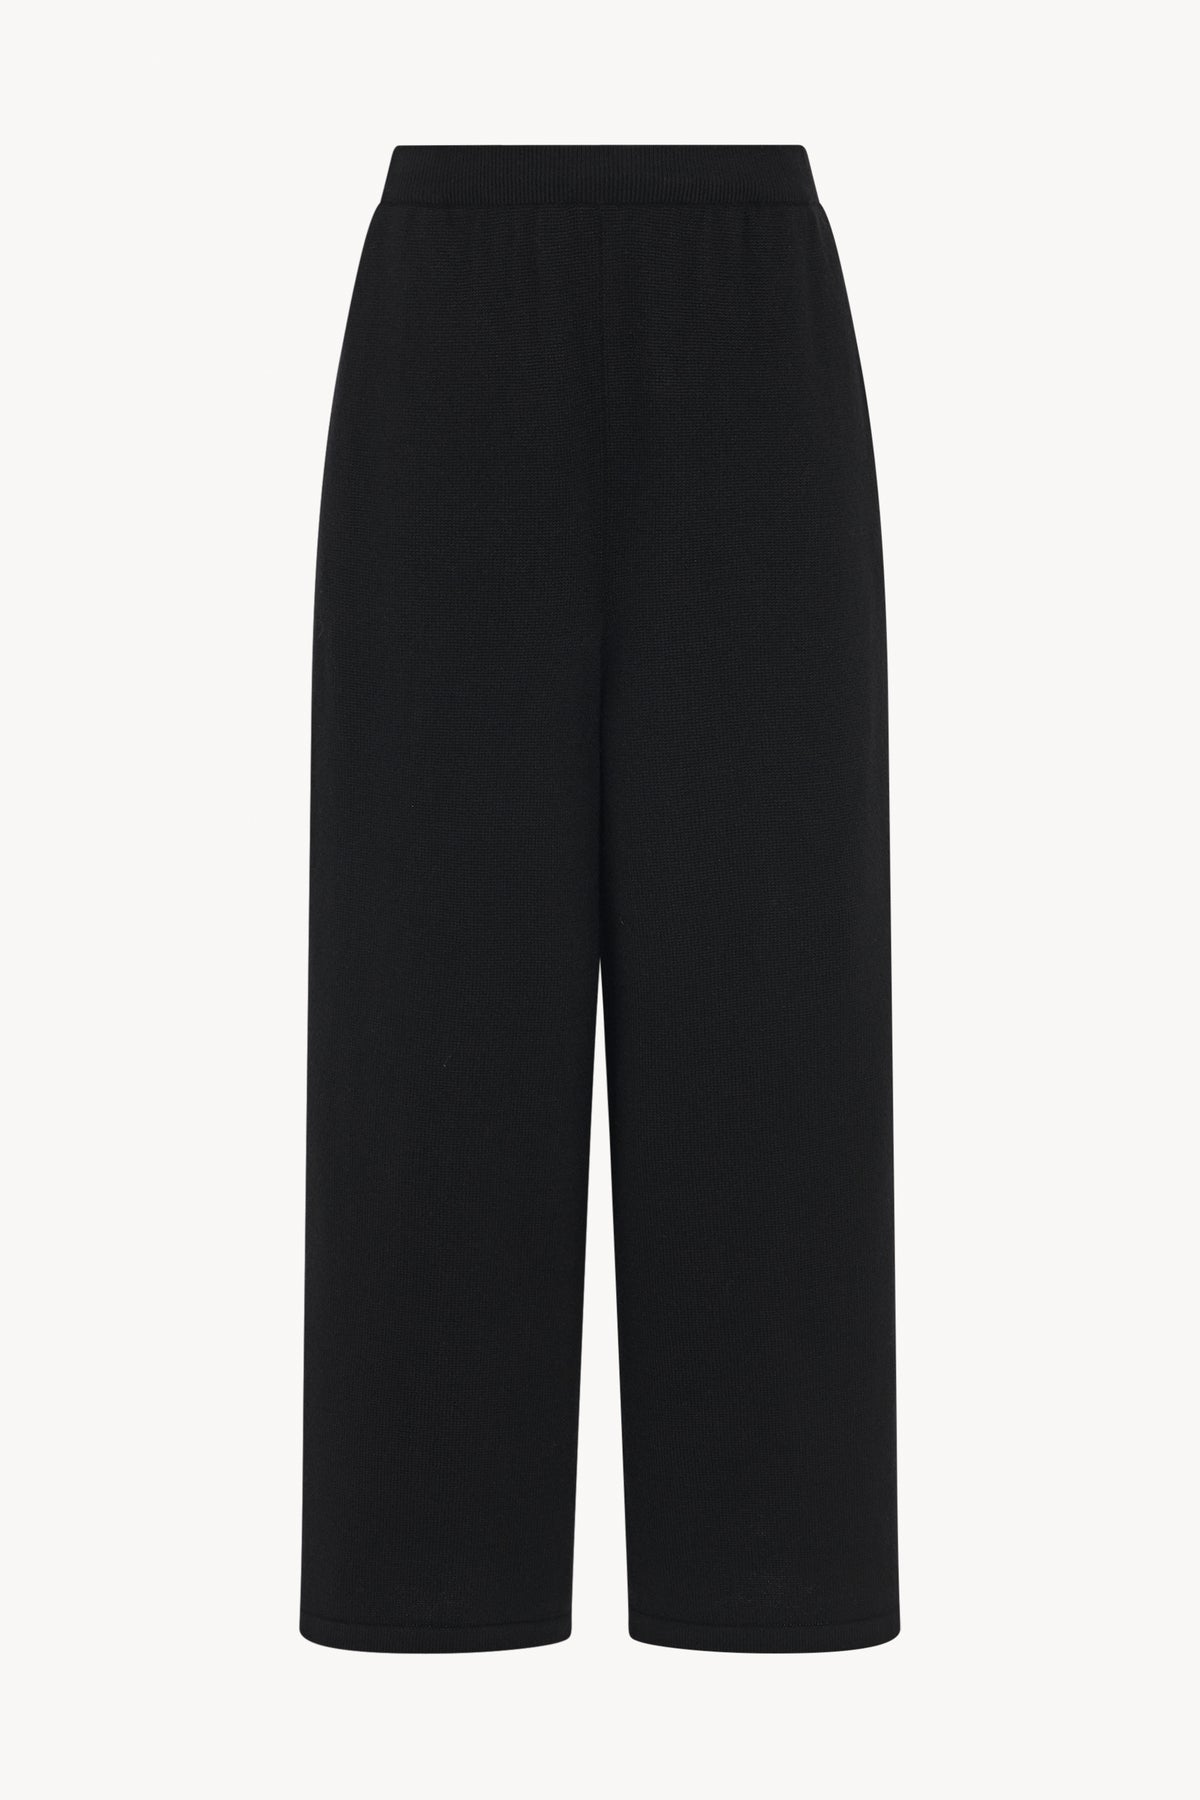 Eloisa Pants in Cashmere